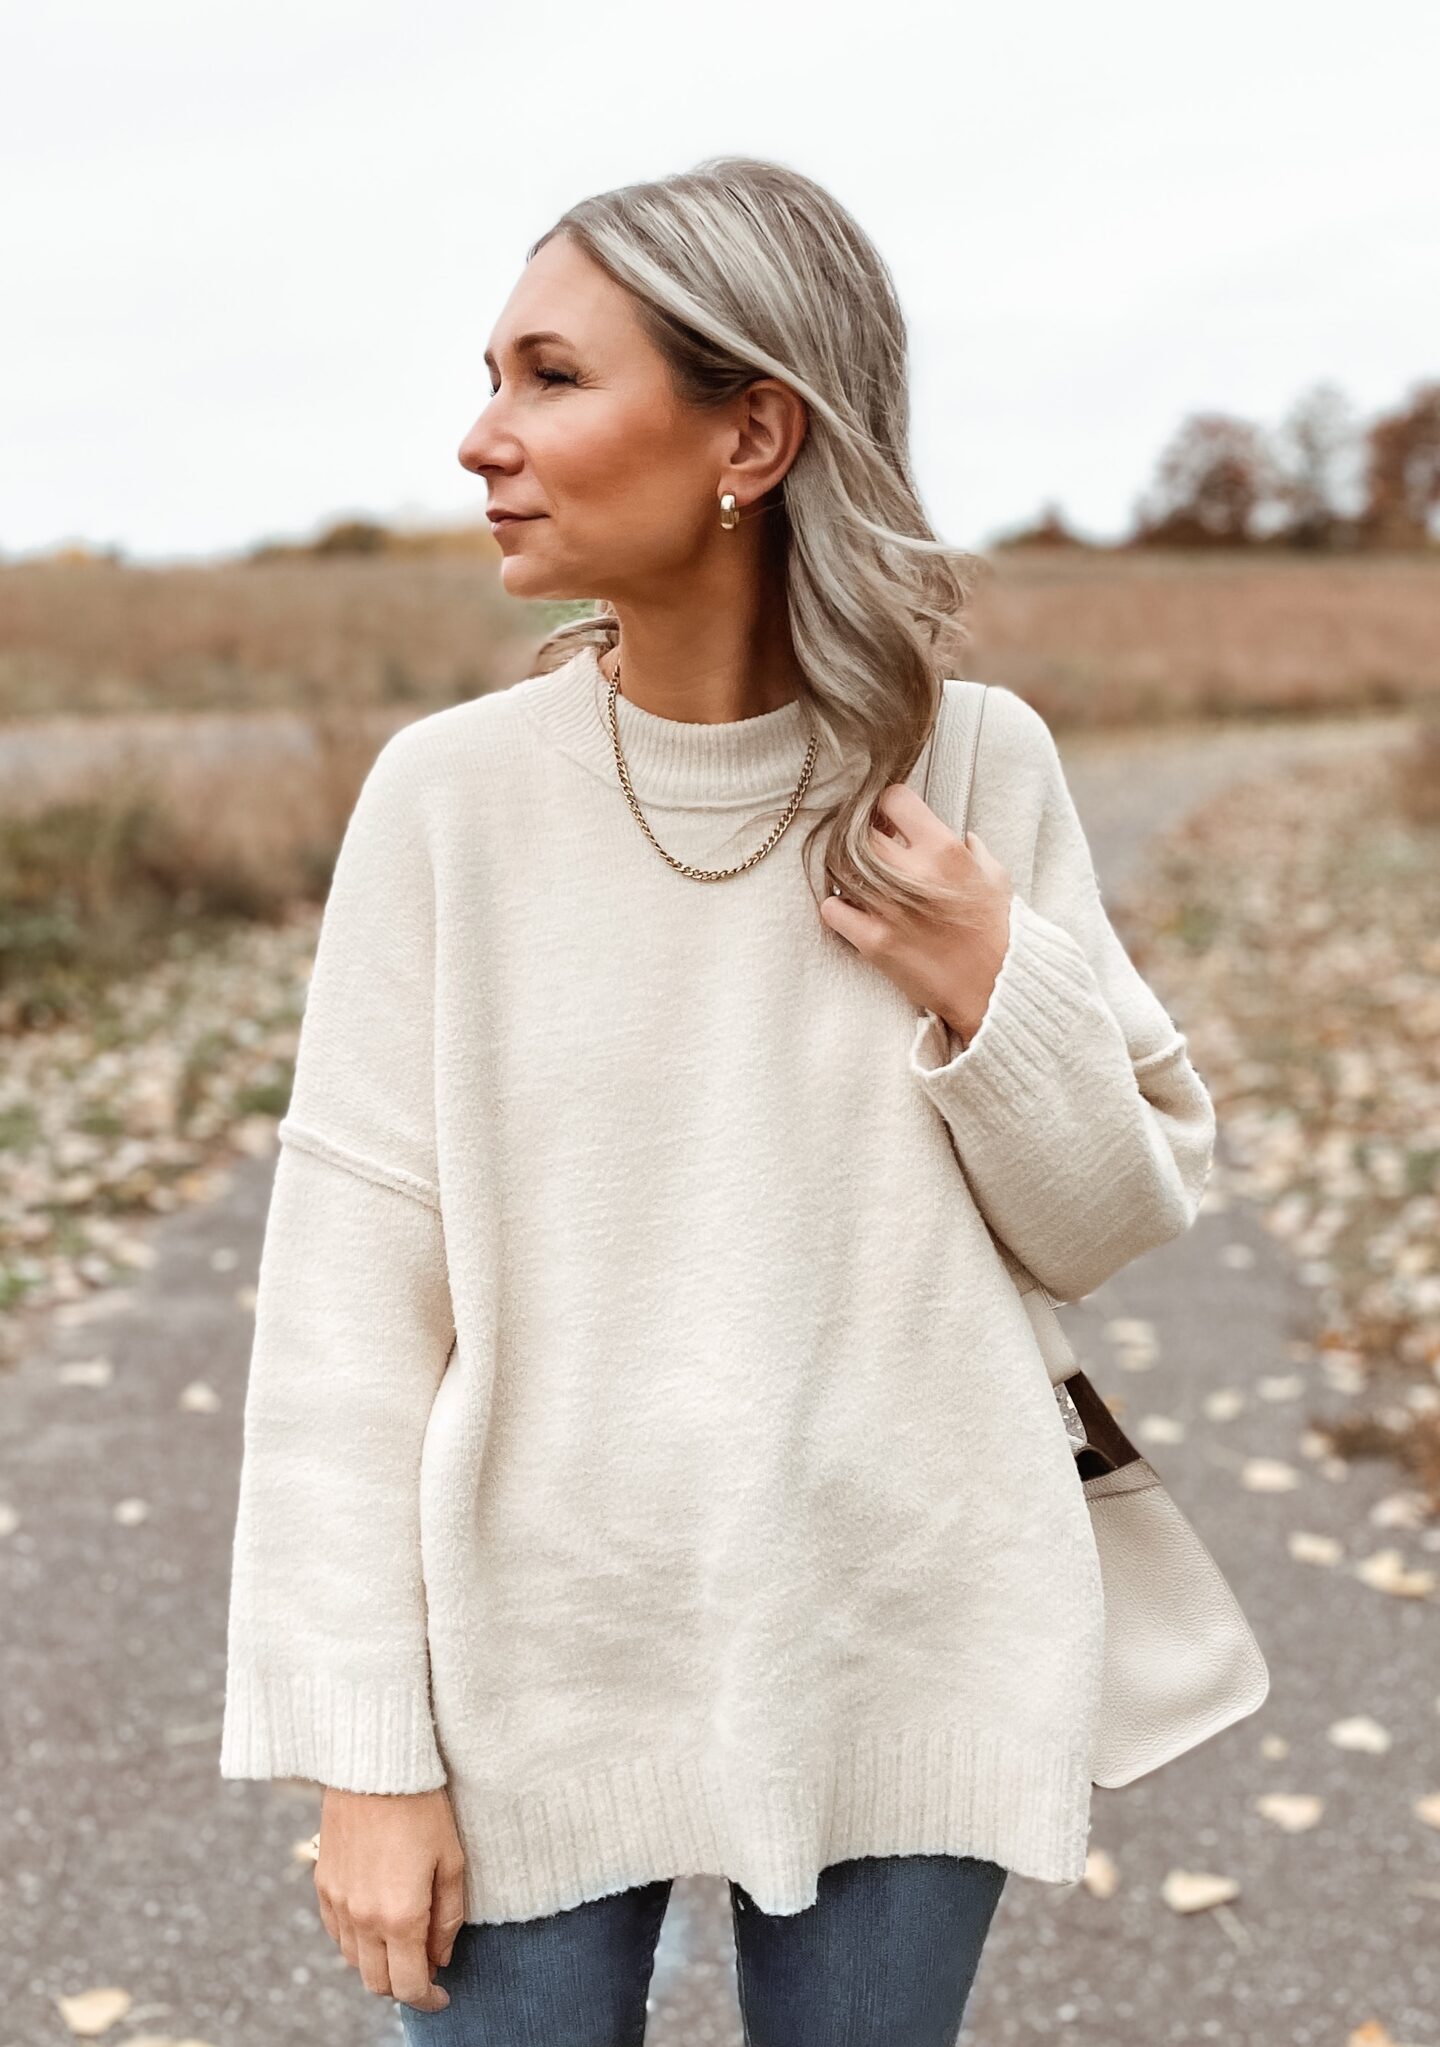 Karin Emily wears the Peaches sweater from Free People